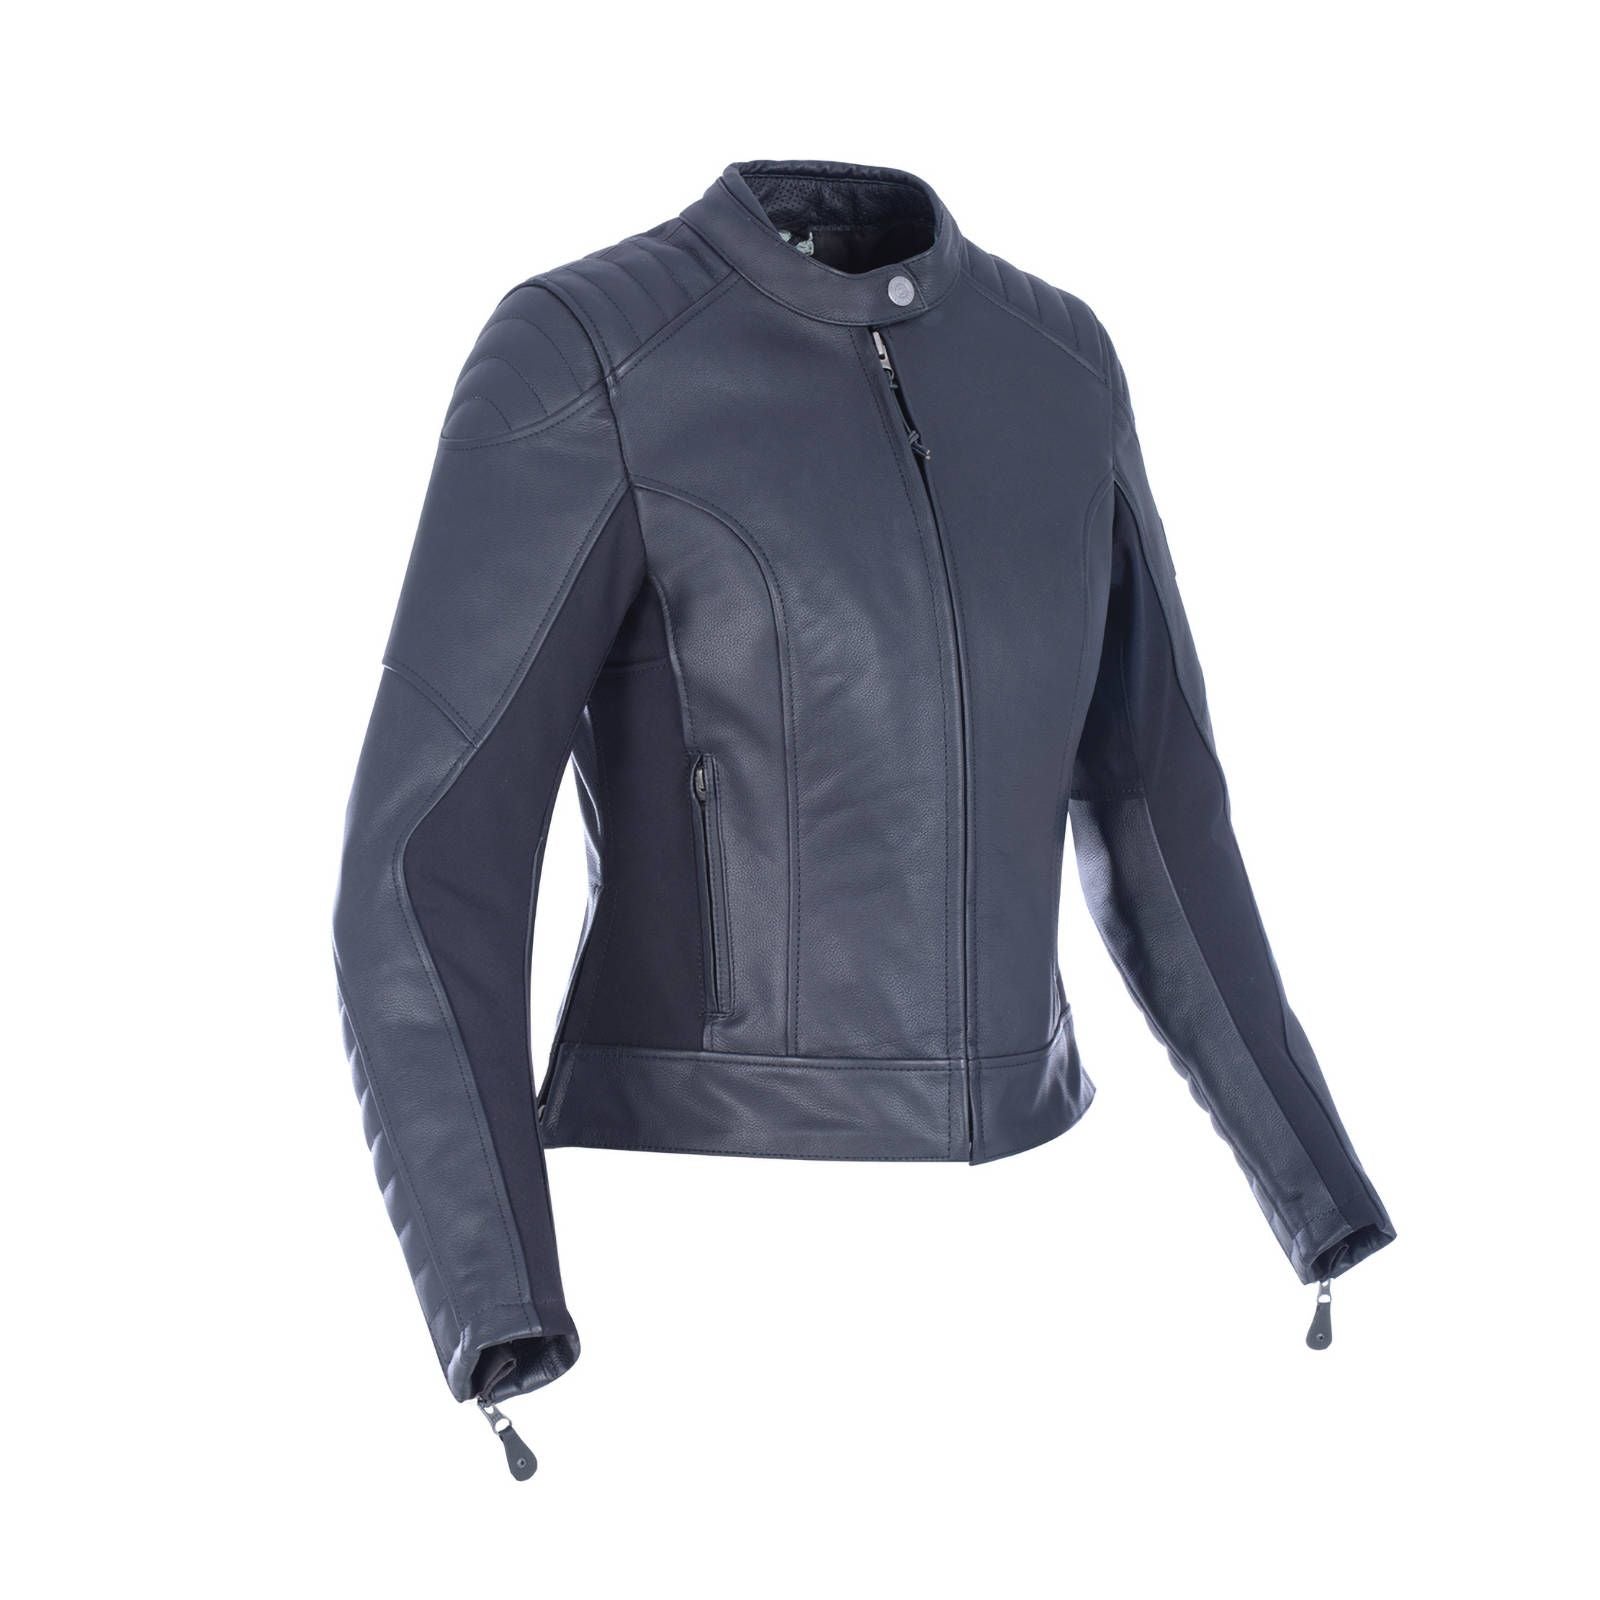 New OXFORD Ladies Beckley Leather Jacket - Black (8) #OXLW1701018